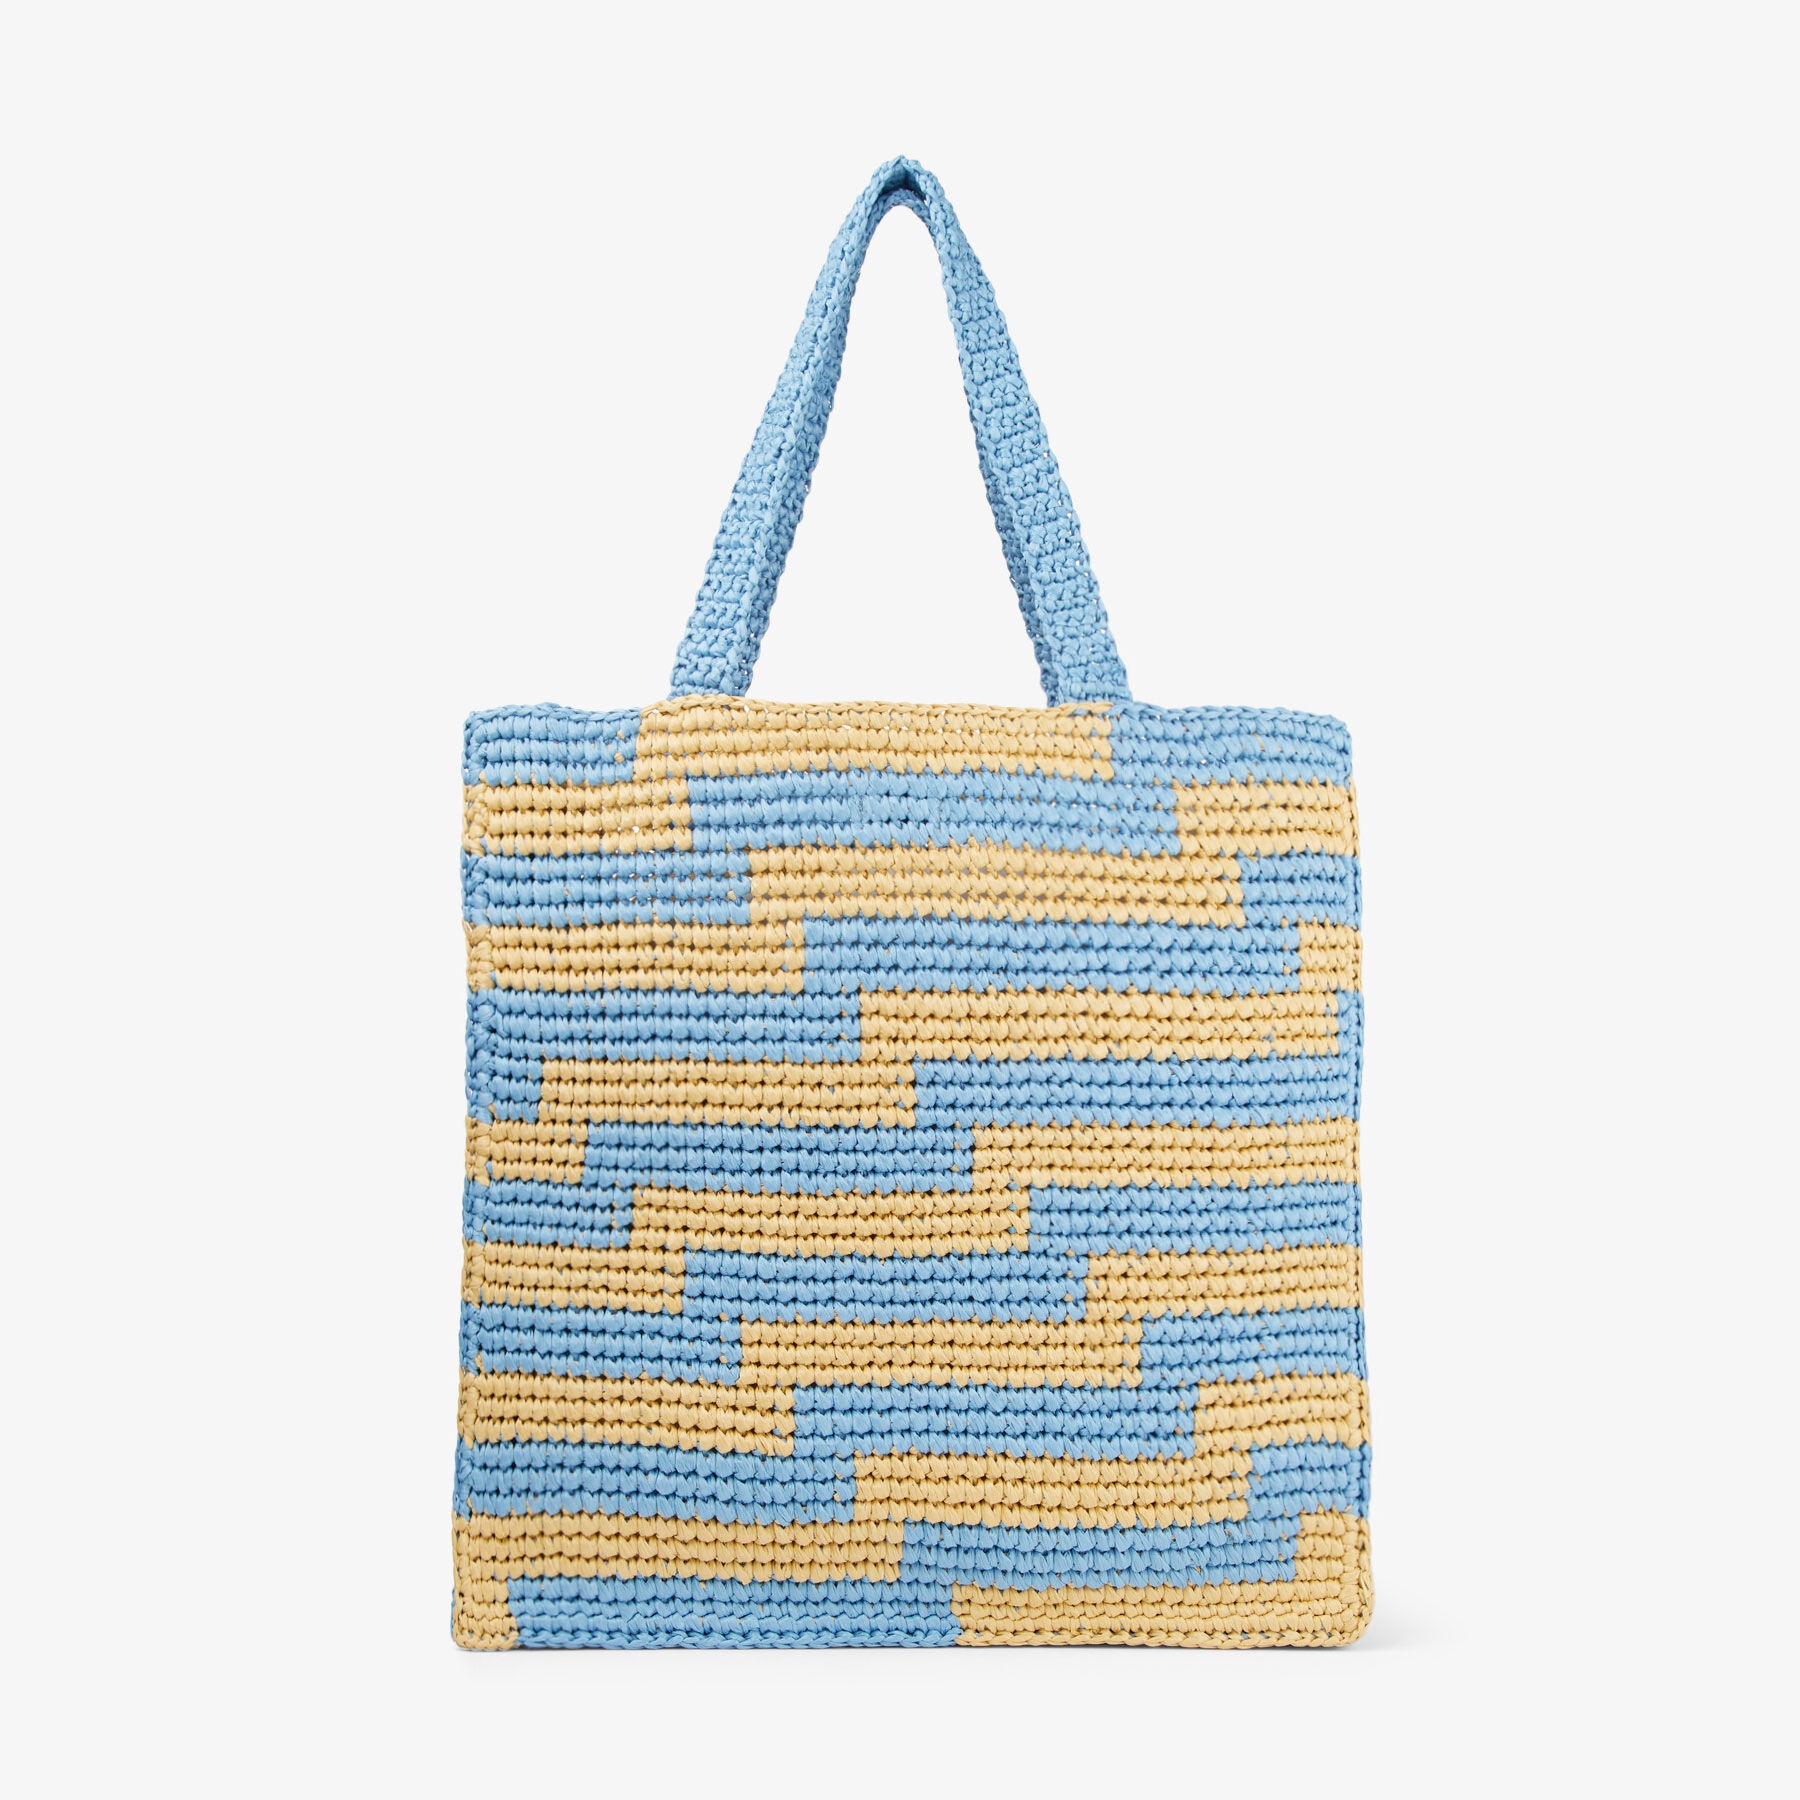 Beach Tote S
Natural and Smoky Blue Avenue Crochet Tote Bag - 5